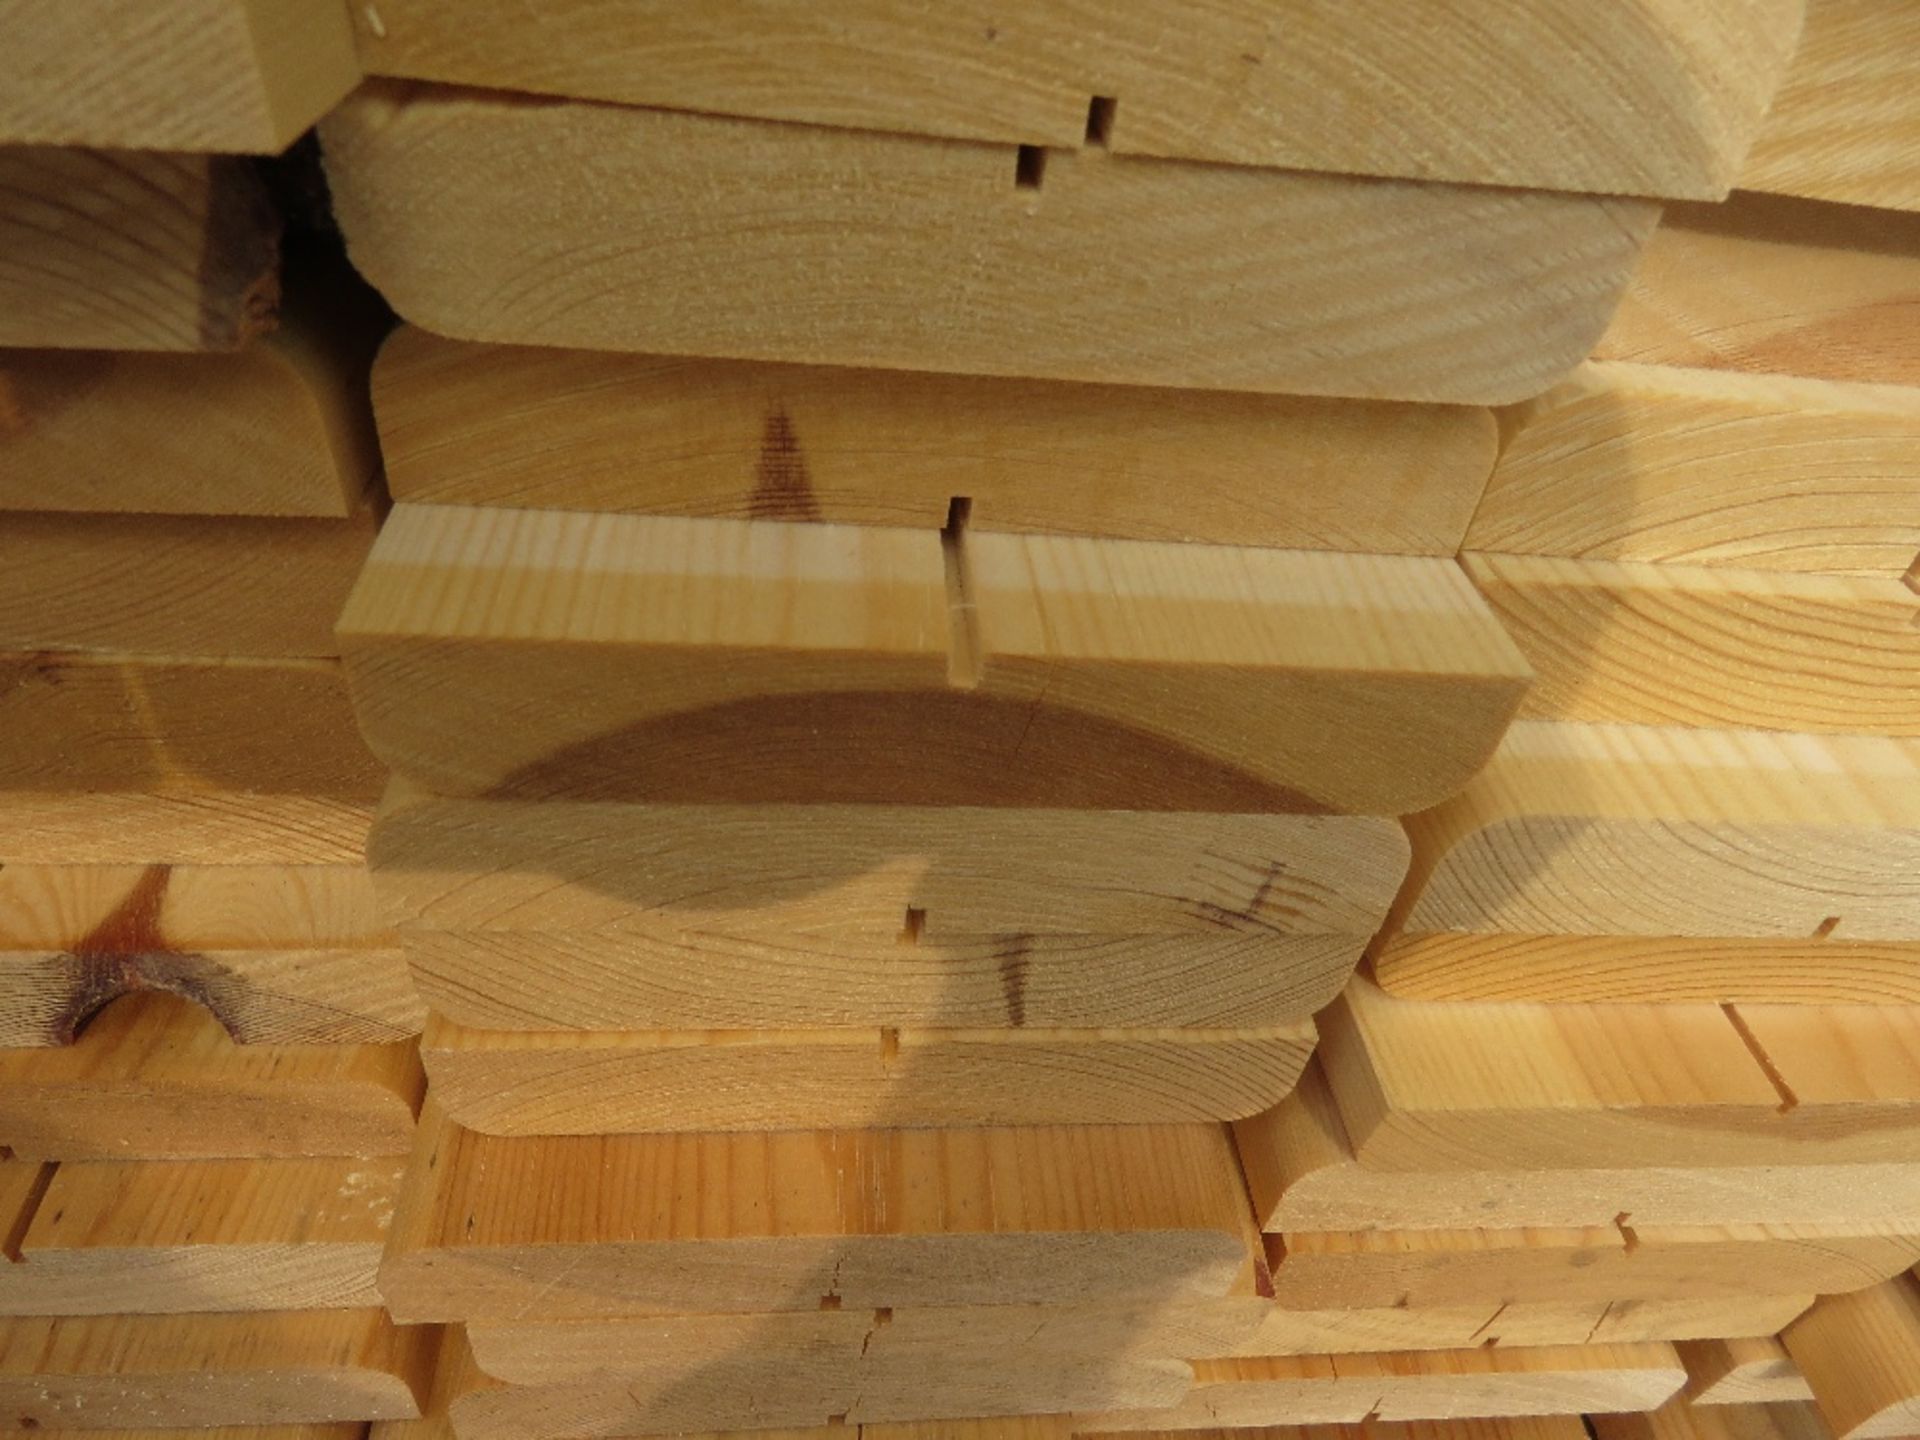 EXTRA LARGE PACK OF UNTREATED FENCE PANEL TOP TIMBER CAPS , 1.88M LENGTH X 120MM WIDTH APPROX. - Image 3 of 3